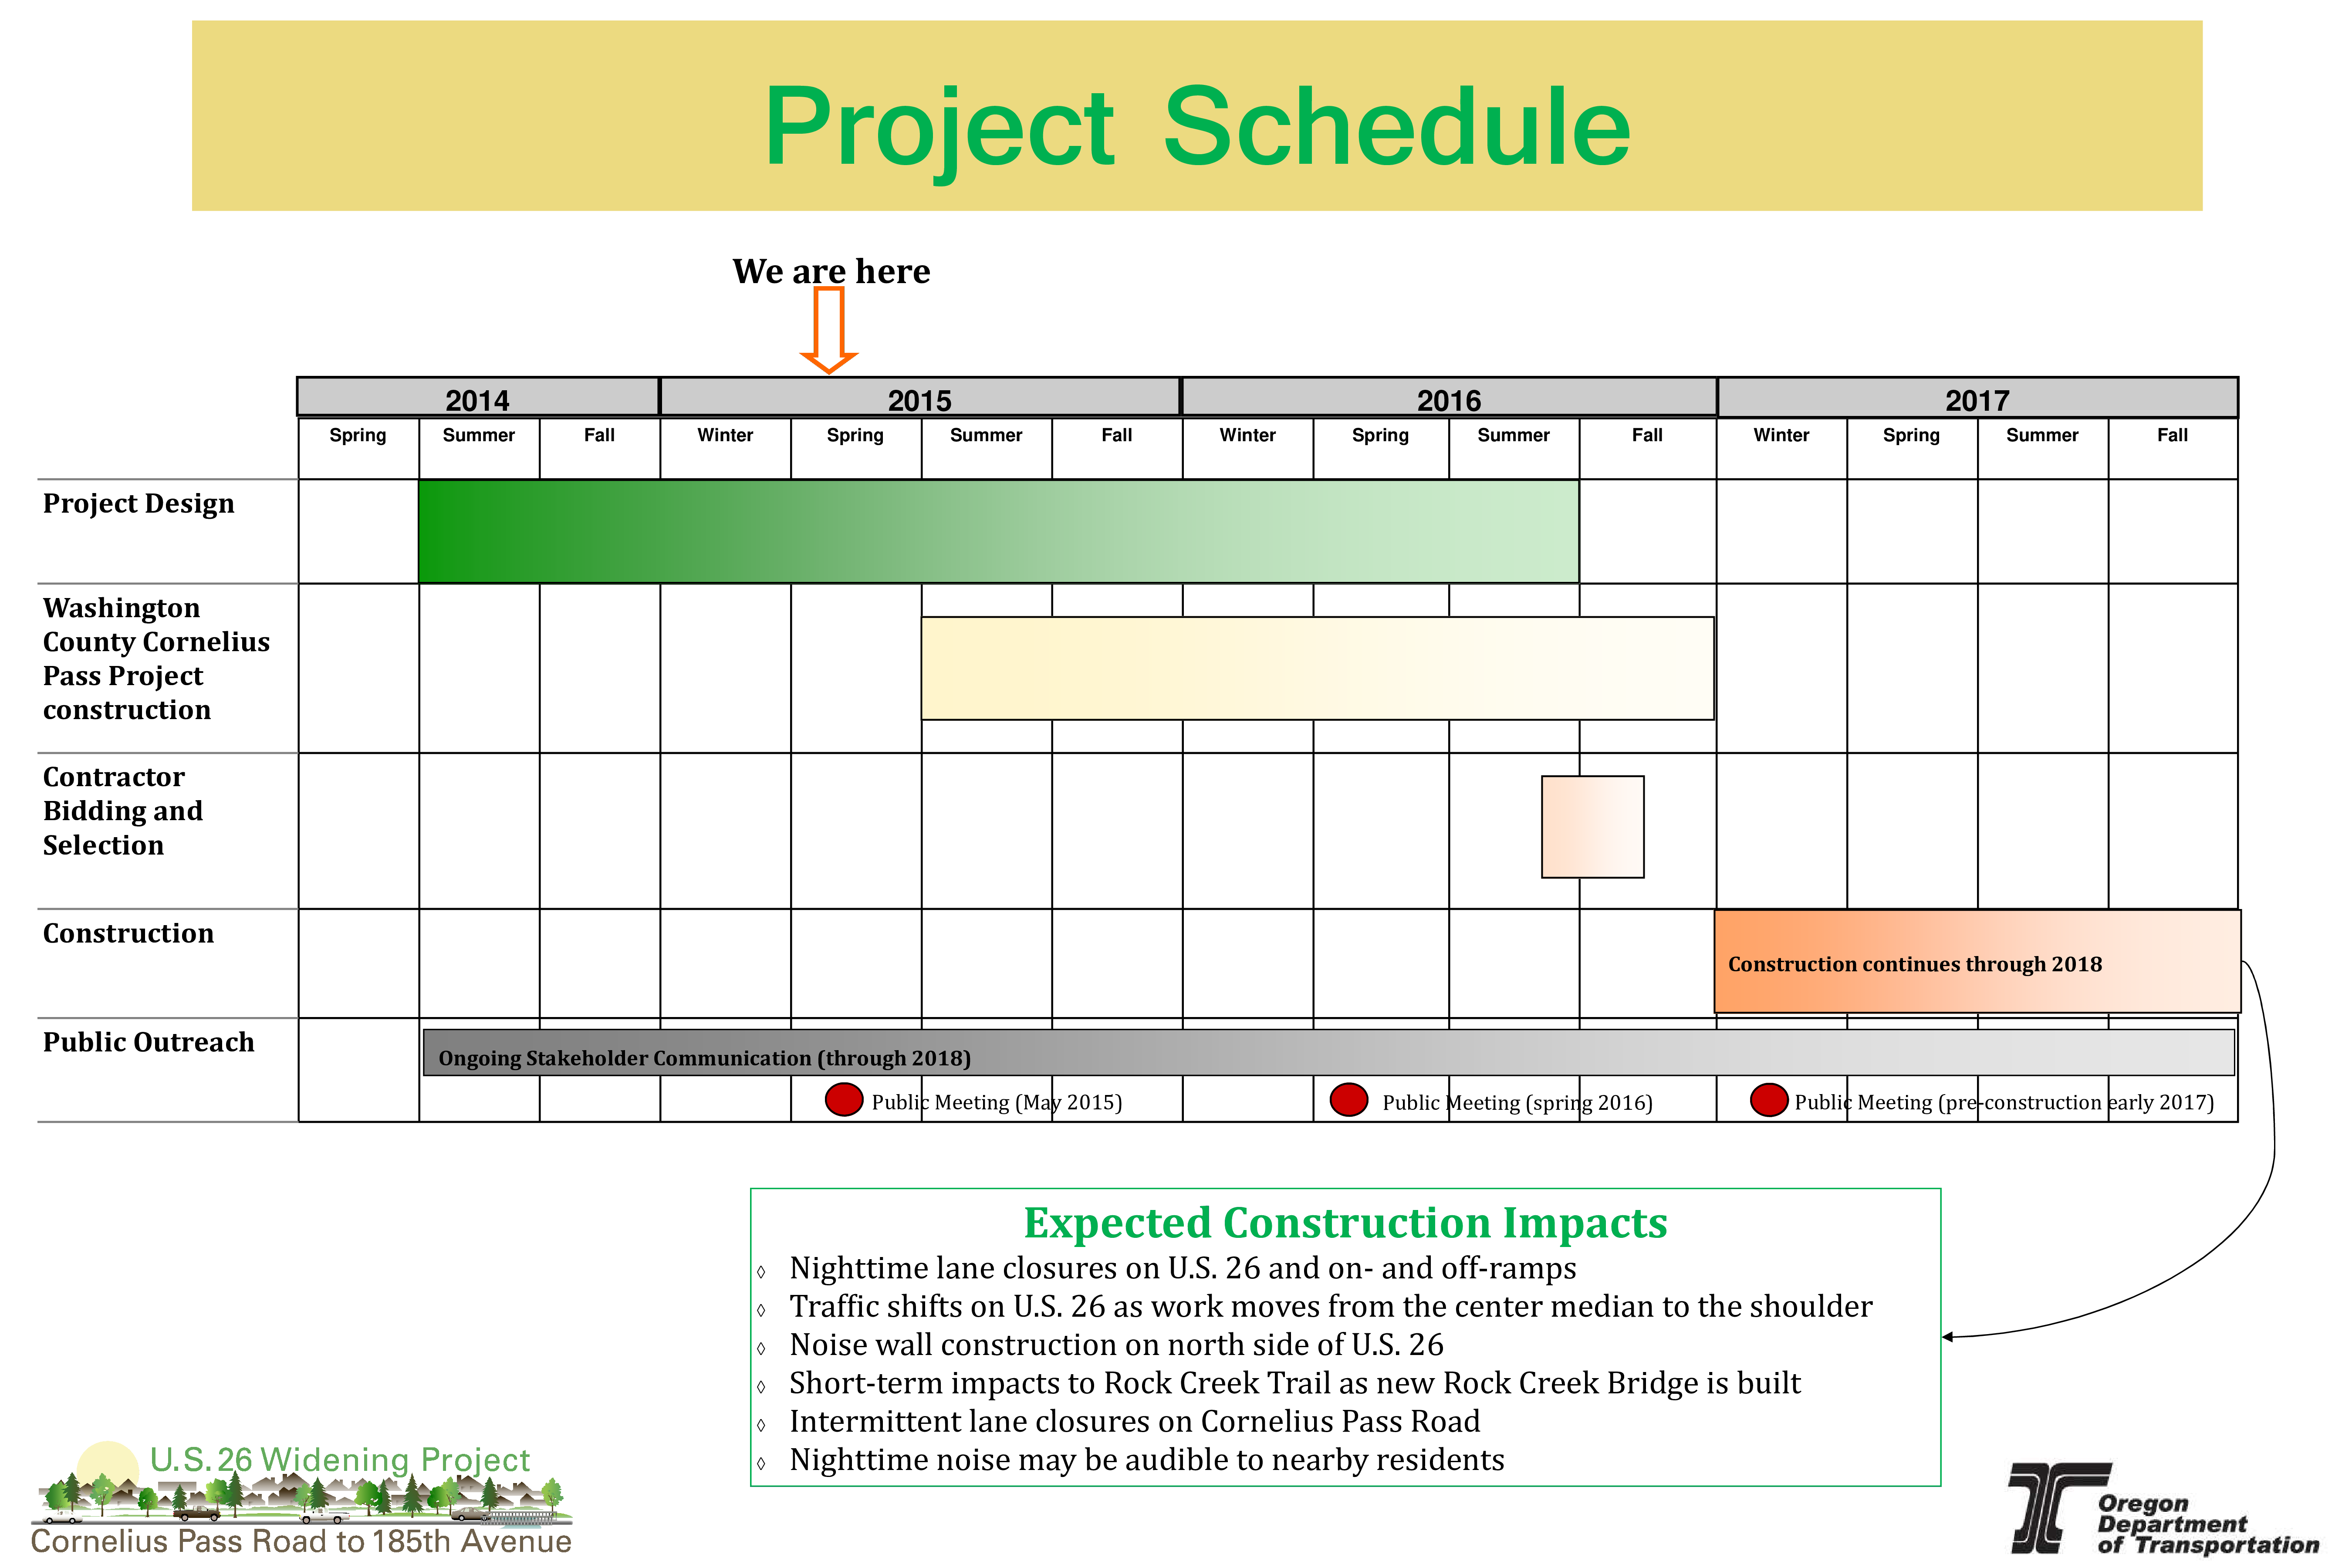 Project Schedule Template Ppt